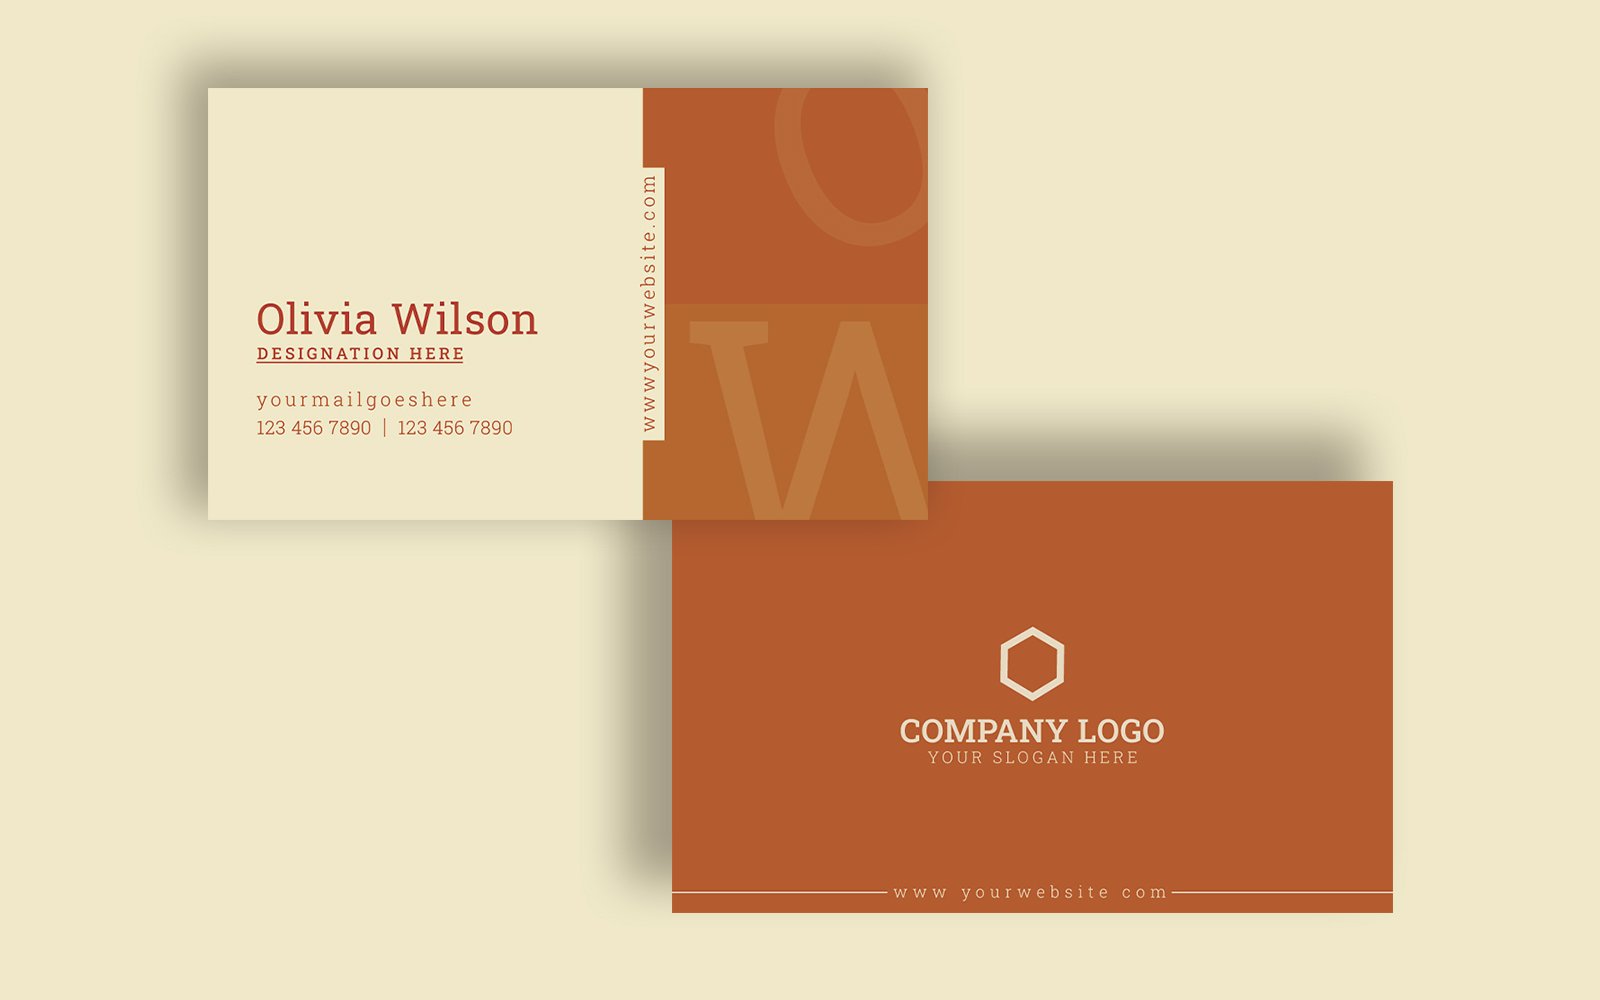 Template #364540 Corporate Graphic Webdesign Template - Logo template Preview